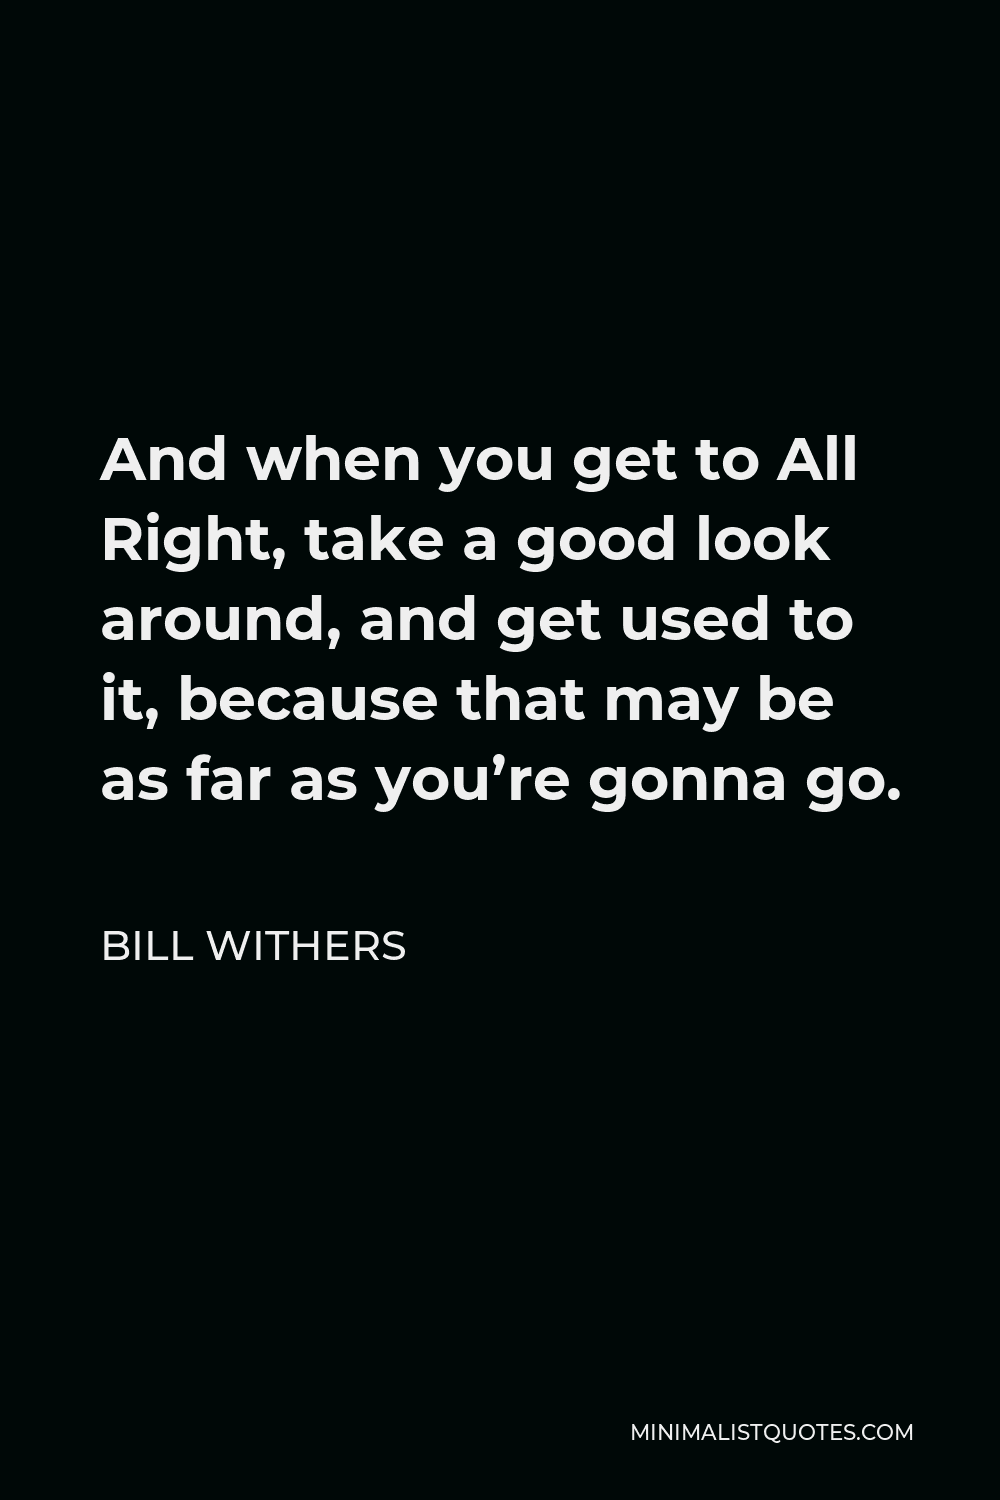 Bill Withers Quote - And when you get to All Right, take a good look around, and get used to it, because that may be as far as you’re gonna go.